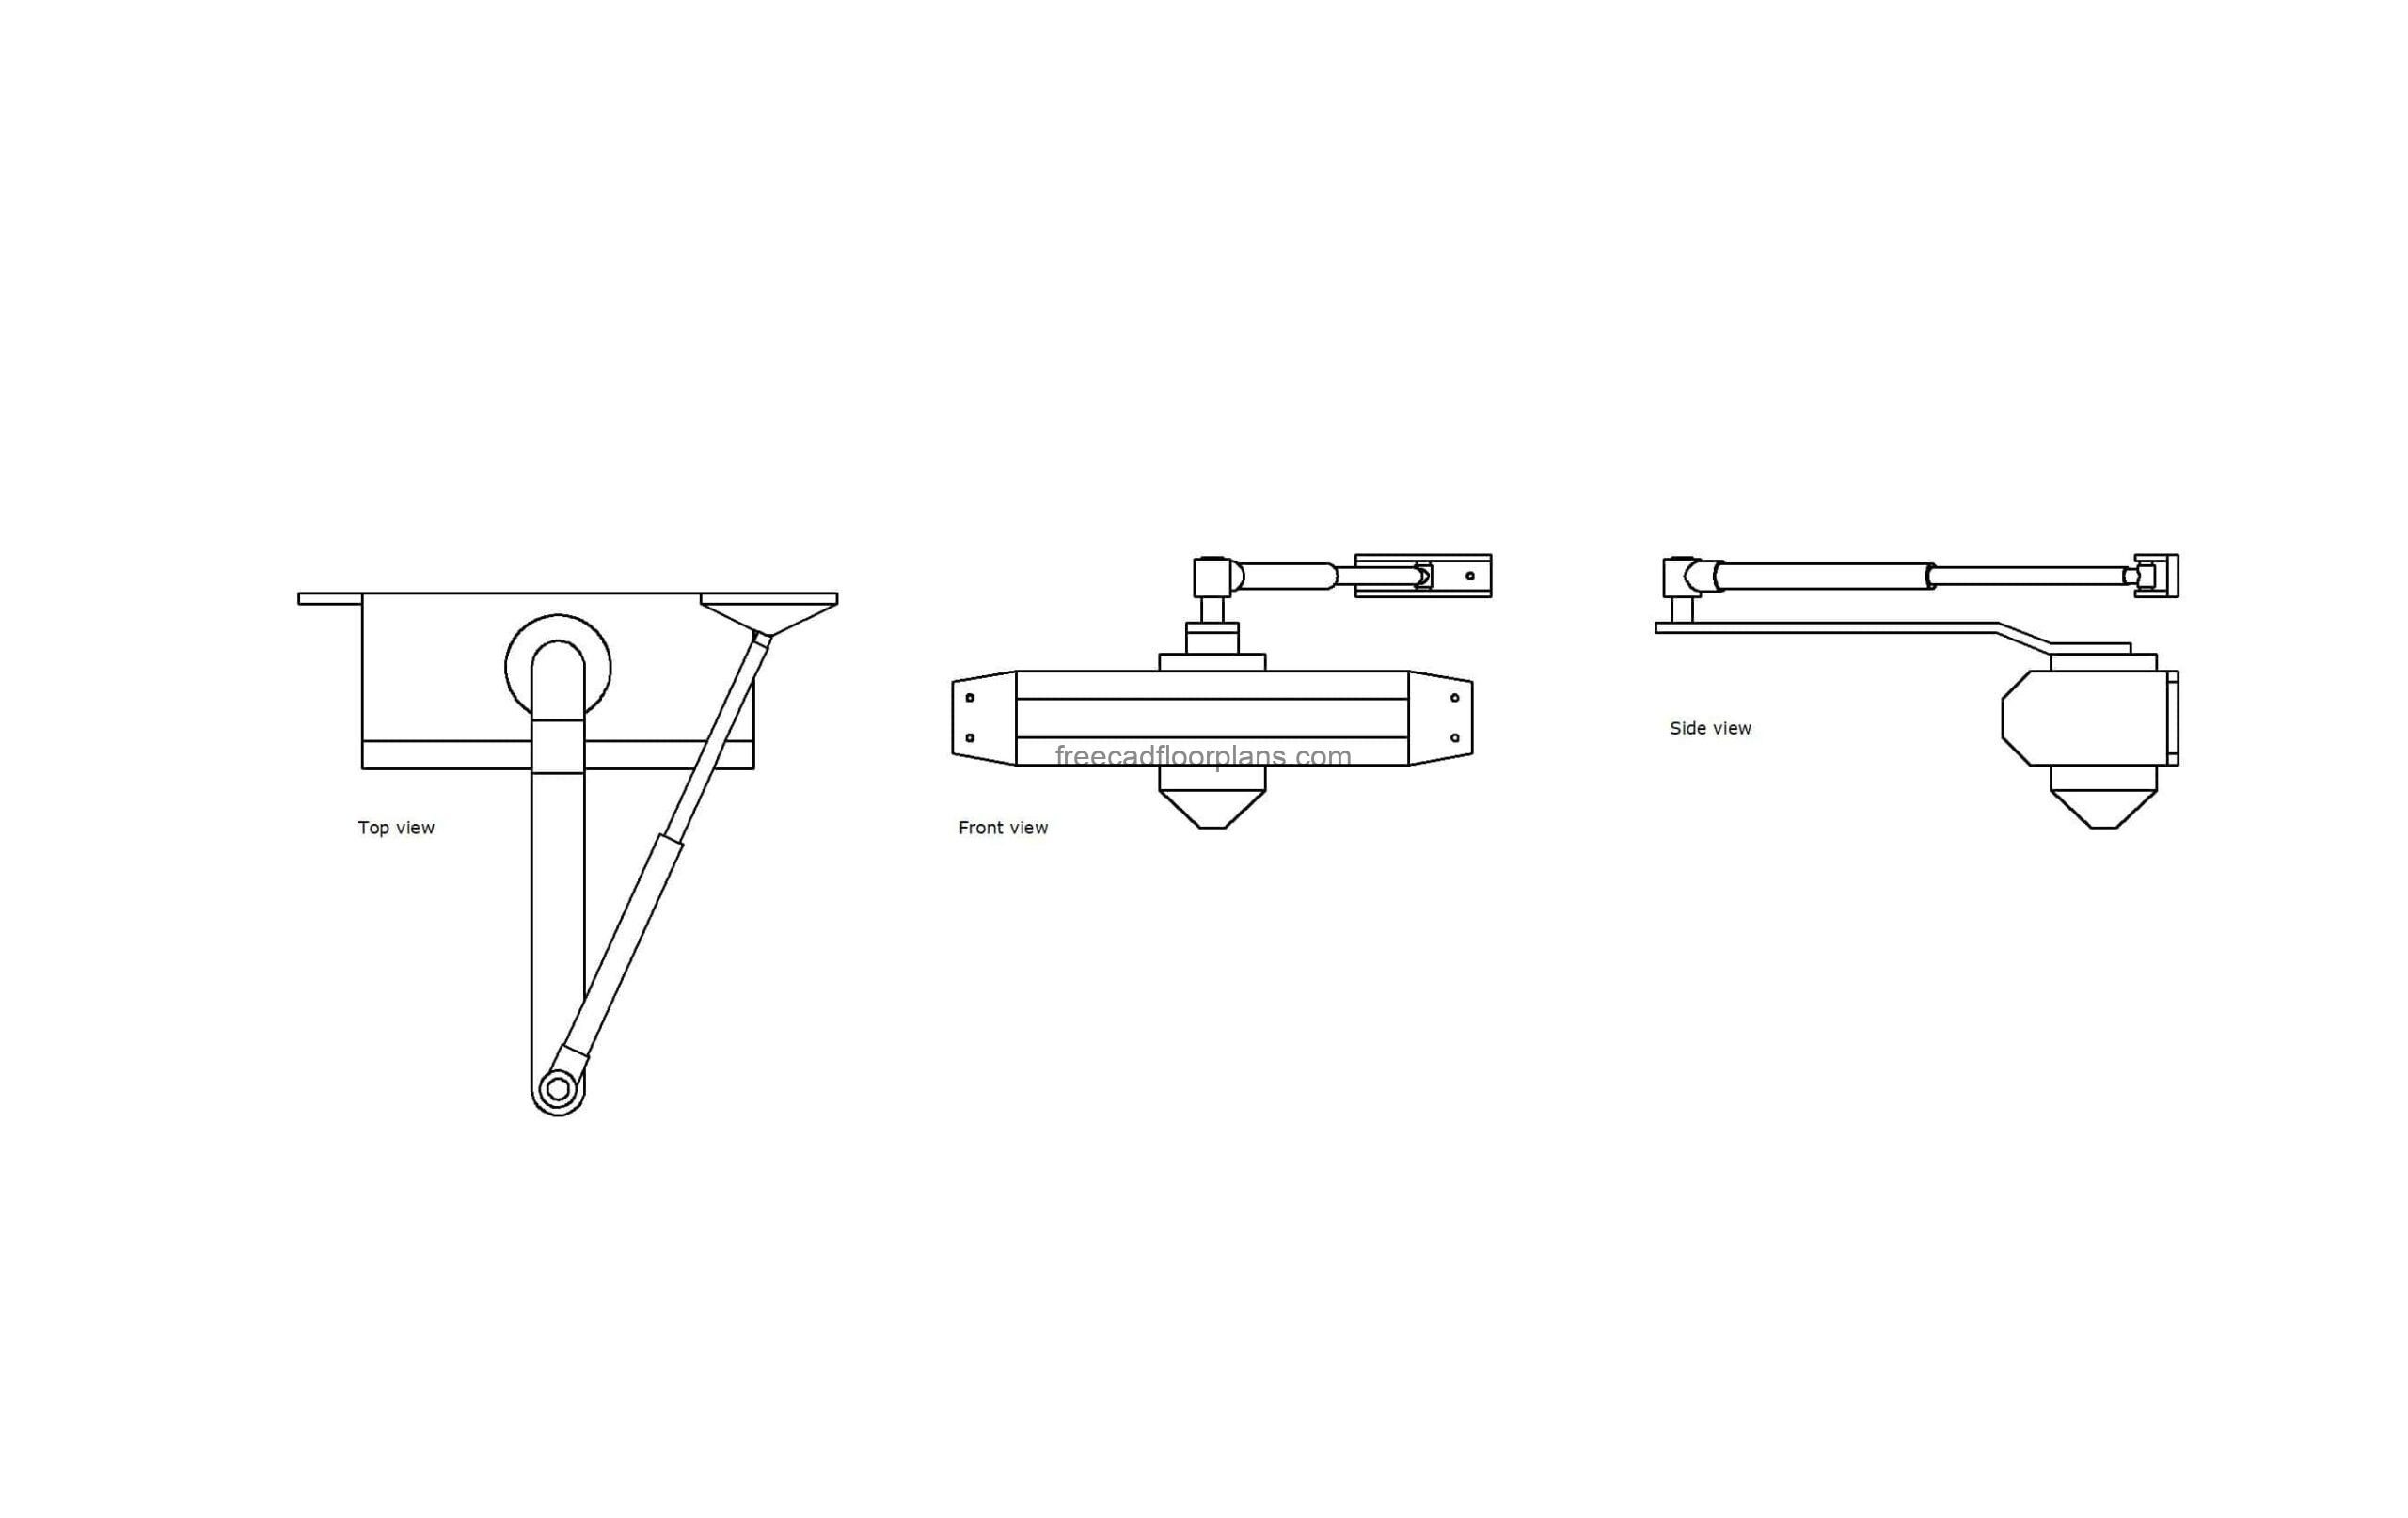 autocad drawing of an hydraulic door closer, plan and elevation 2d views, dwg file free for download